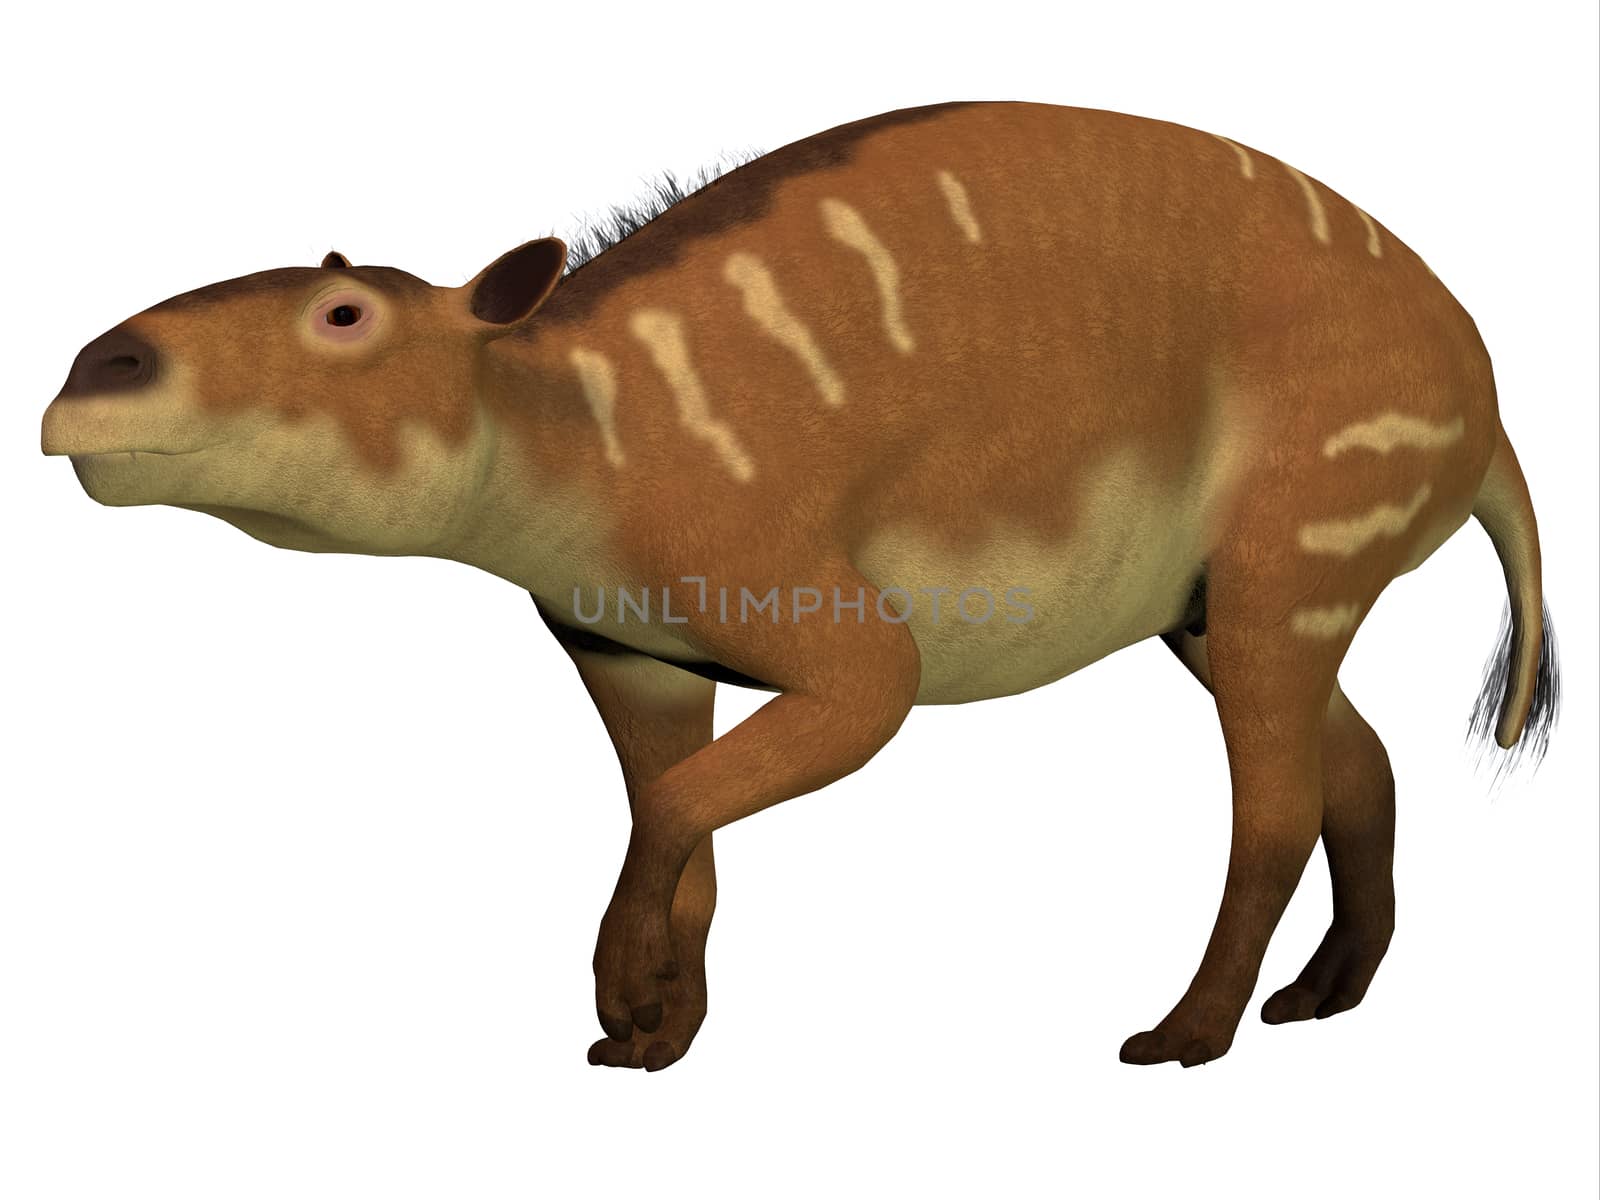 Eurohippus is the herbivorous forerunner of the horse that lived in the Eocene Period in tropical jungles of Europe. 